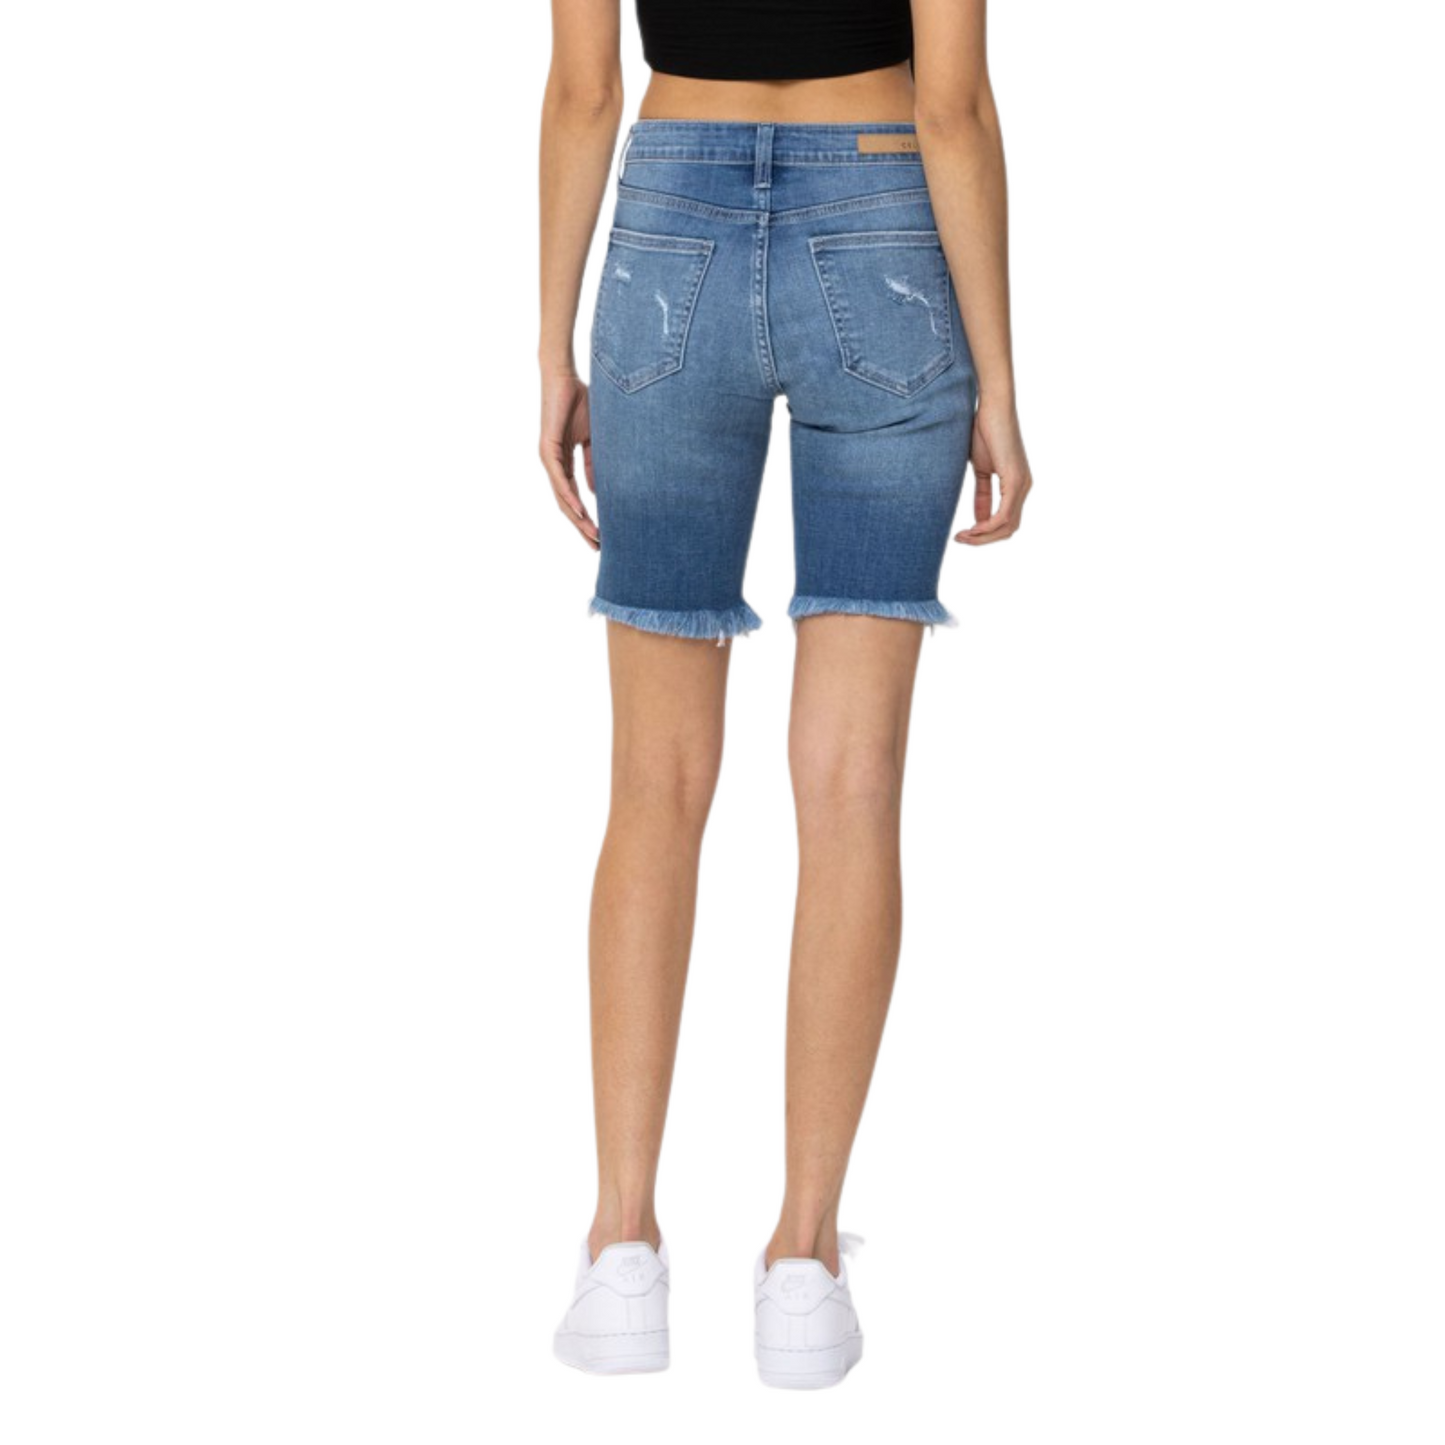 Our Mid Rise Distressed Bermuda is crafted from super-soft and comfortable fabric for an easy fit. Offered in a medium wash with raw bottom hem and distressed details, these high-style shorts make an effortlessly stylish statement.